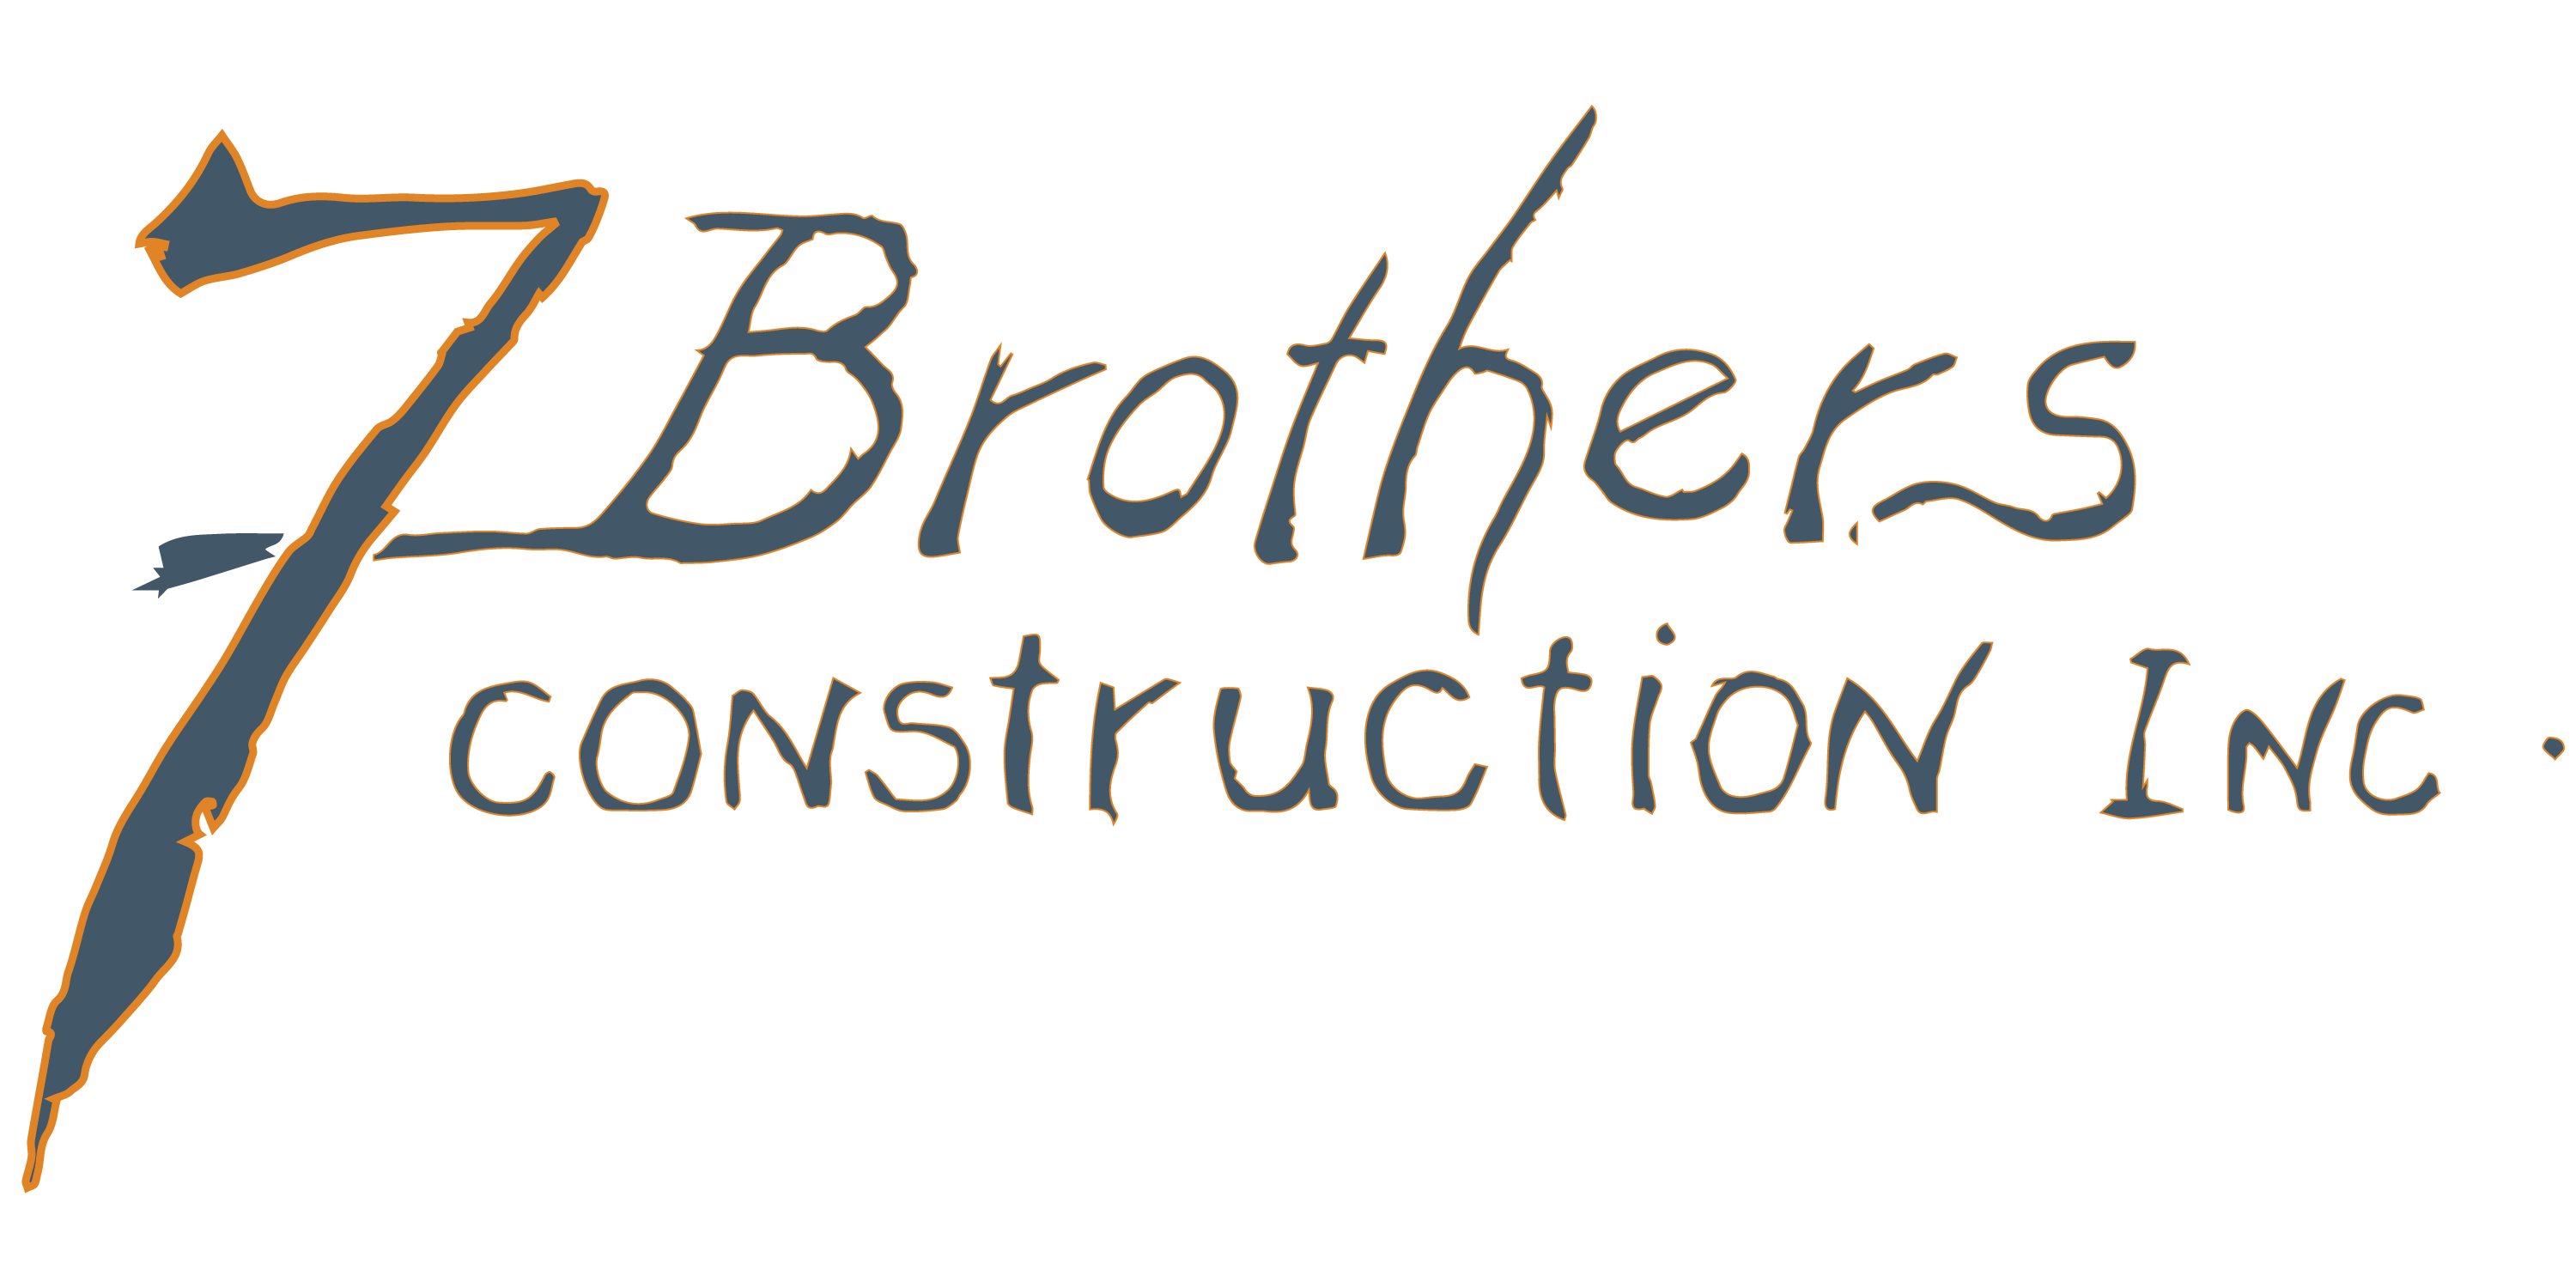 7 Brothers Construction